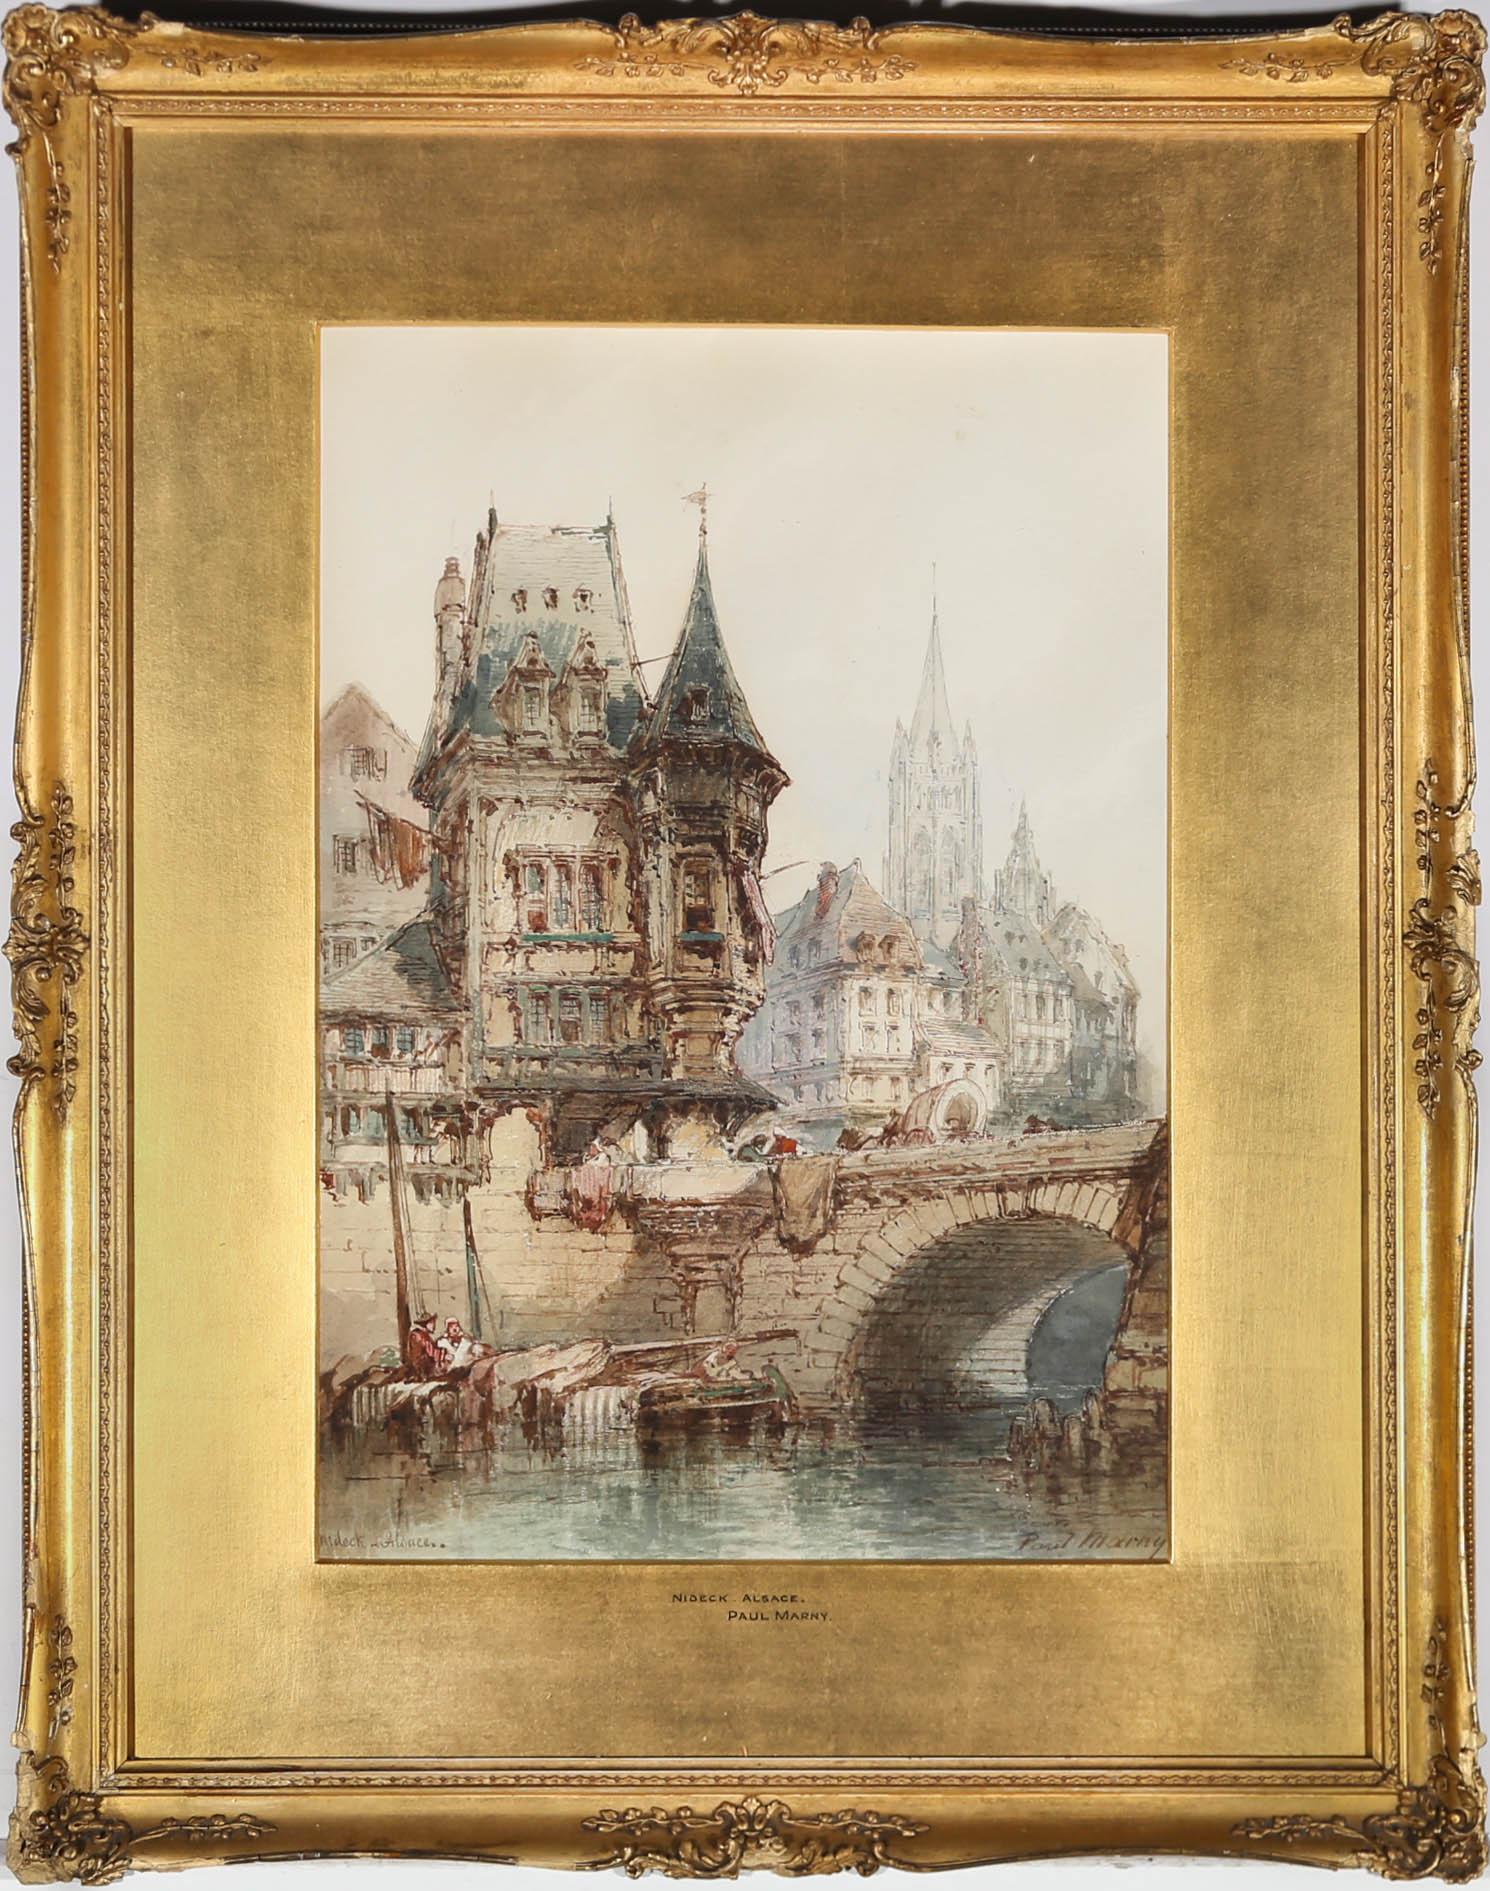 A charming 19th Century view of Nideck, Alsace in France. The artist has wonderfully captured the complex architecture and bustling nature of the town. The artist has signed to the lower right and inscribed the location to the lower left. The